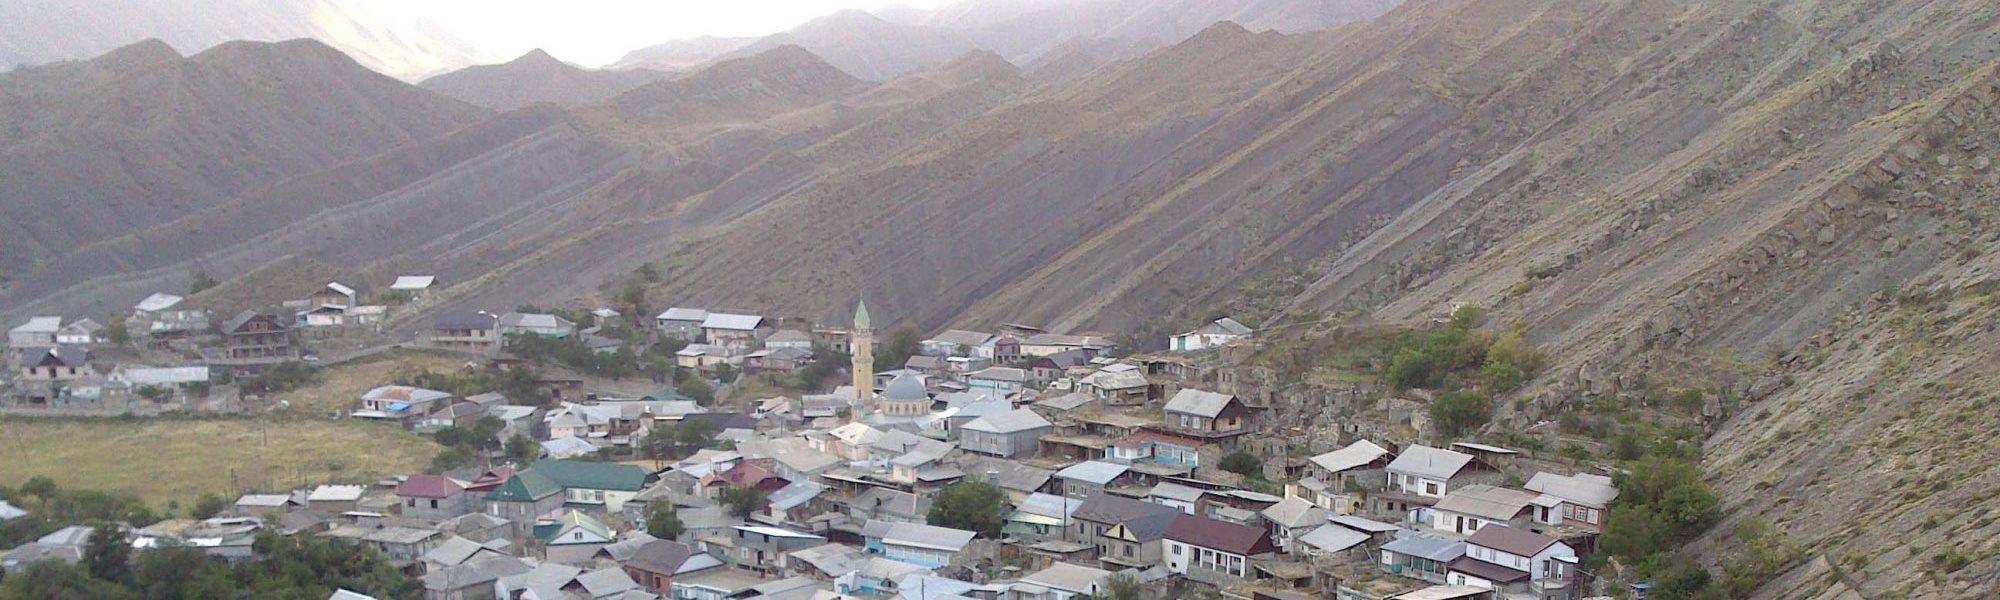 A look at the central part of the Muni village, Andi-speaking area, Daghestan